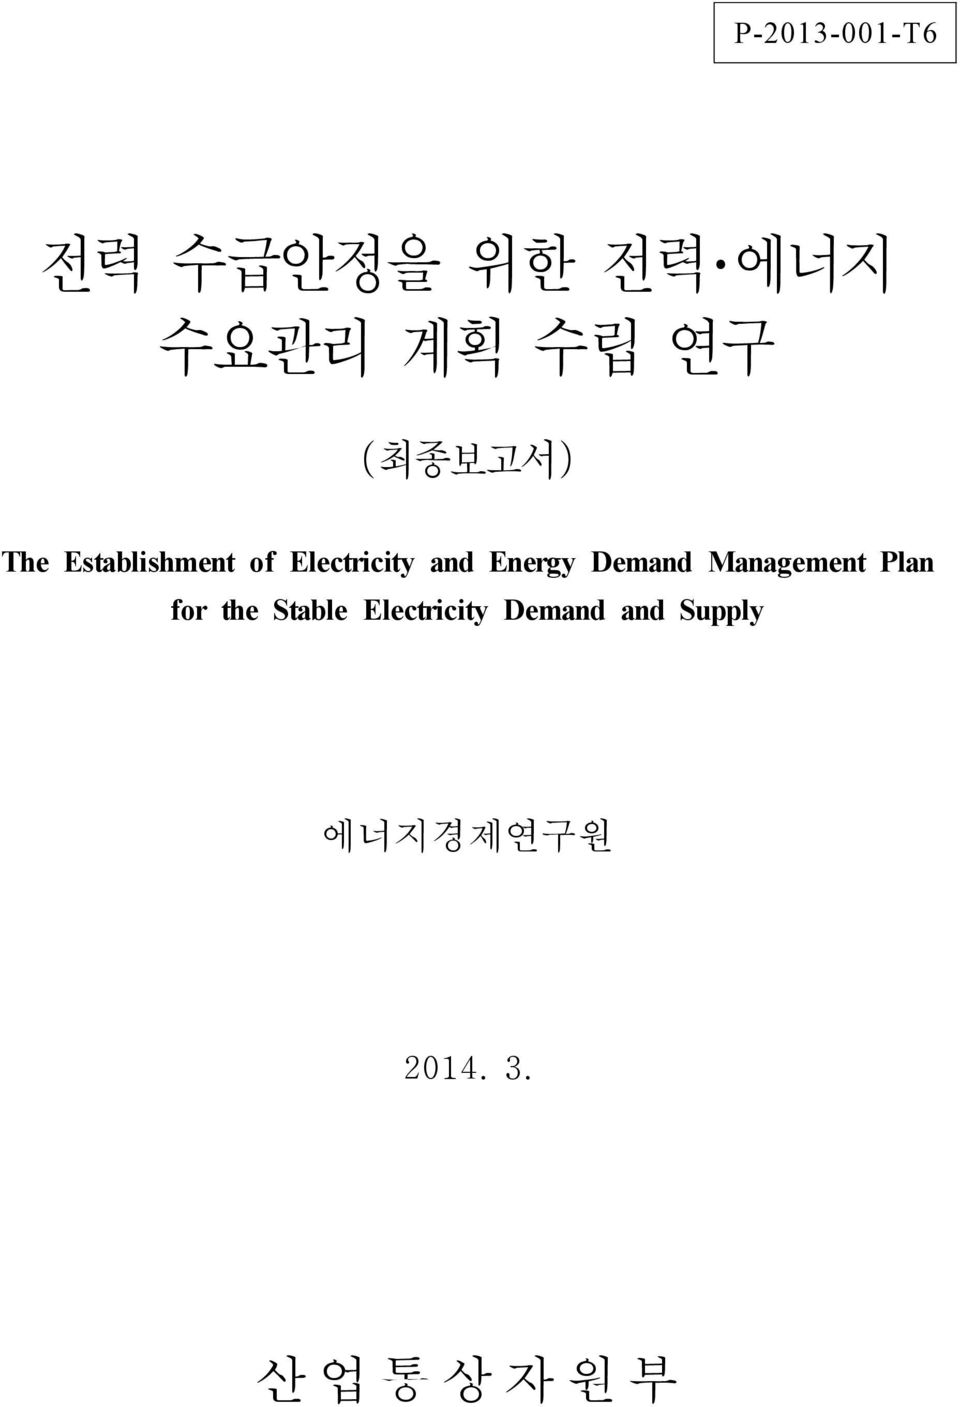 Energy Demand Management Plan for the Stable